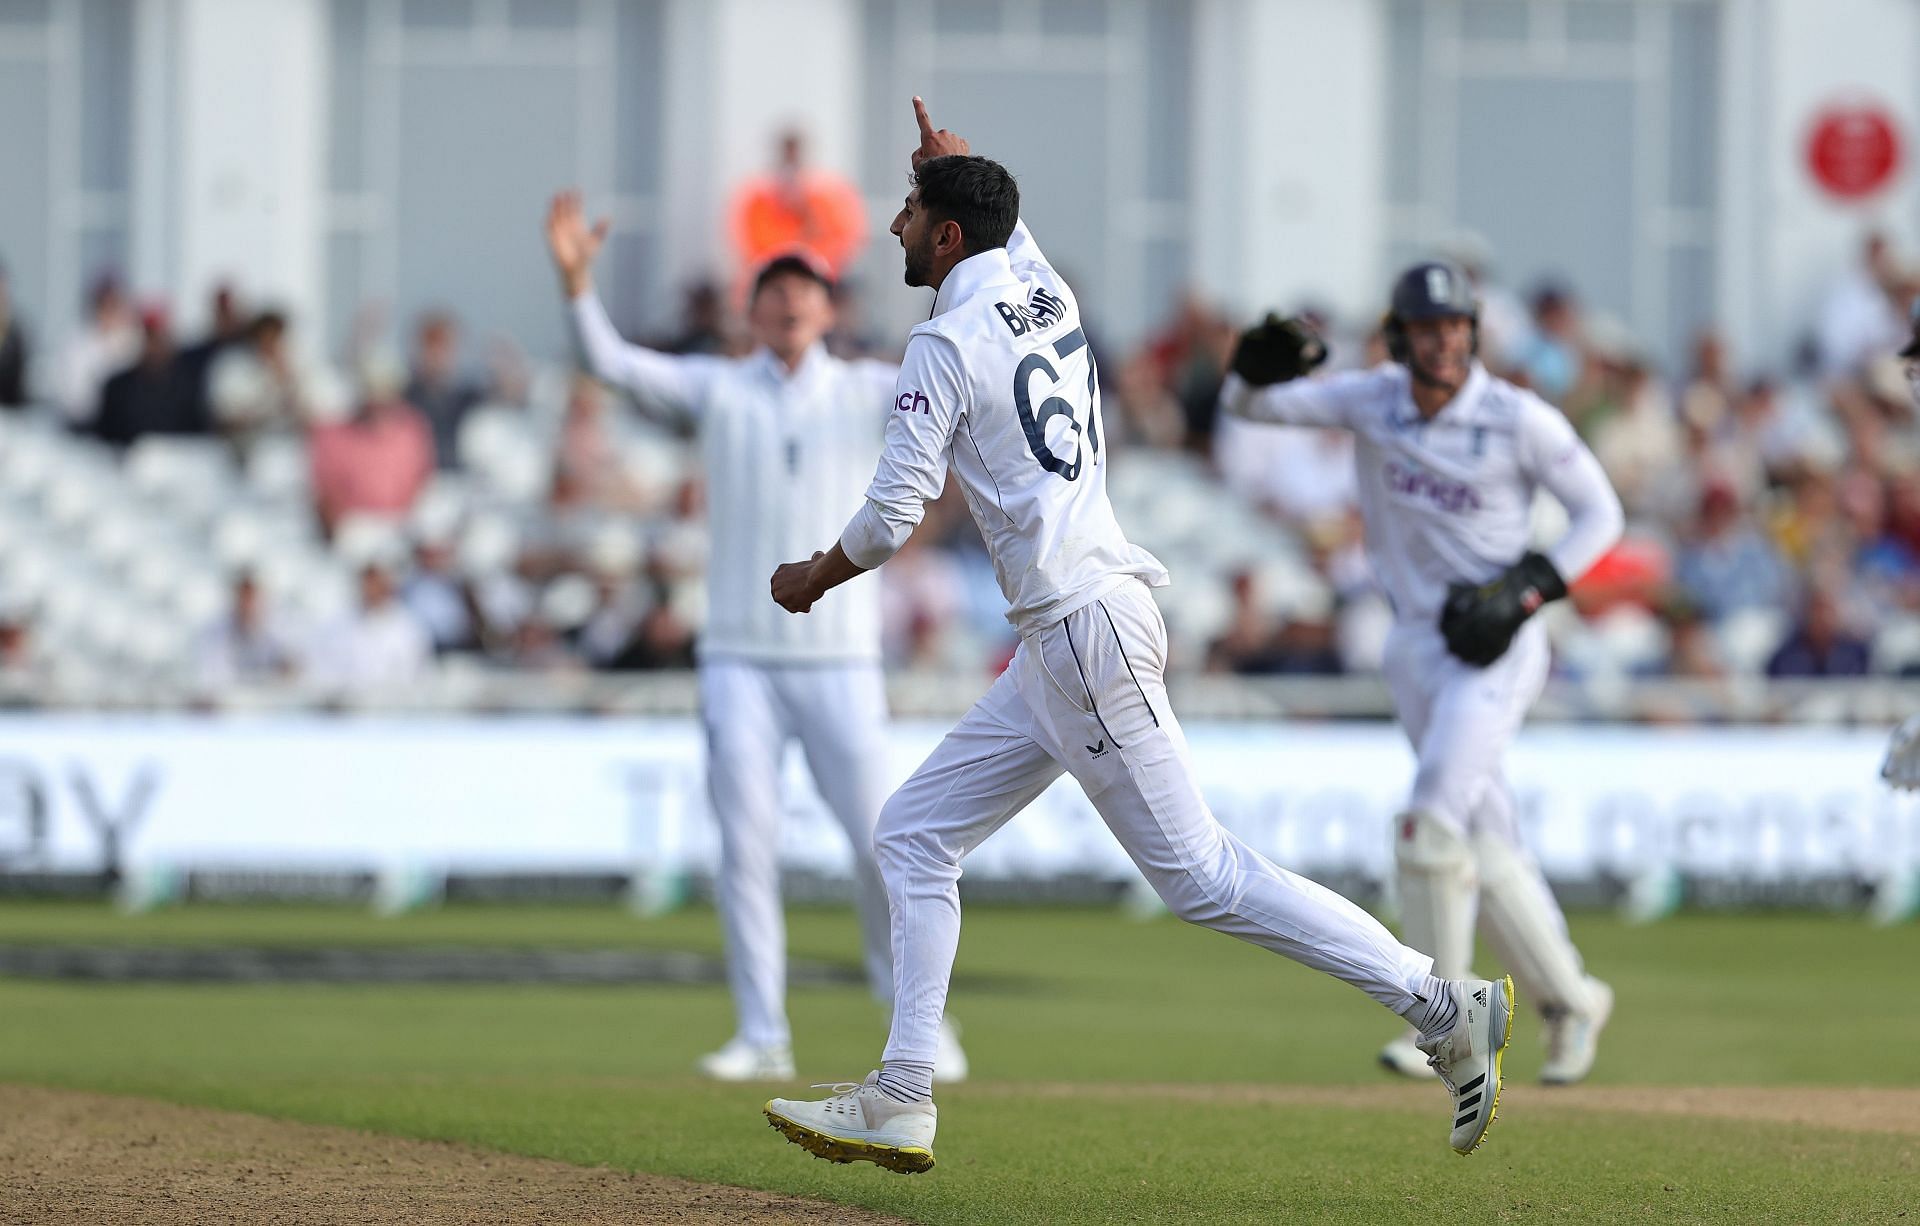 [Watch] Shoaib Bashir strikes twice in two overs to put West Indies on backfoot in 2nd Test